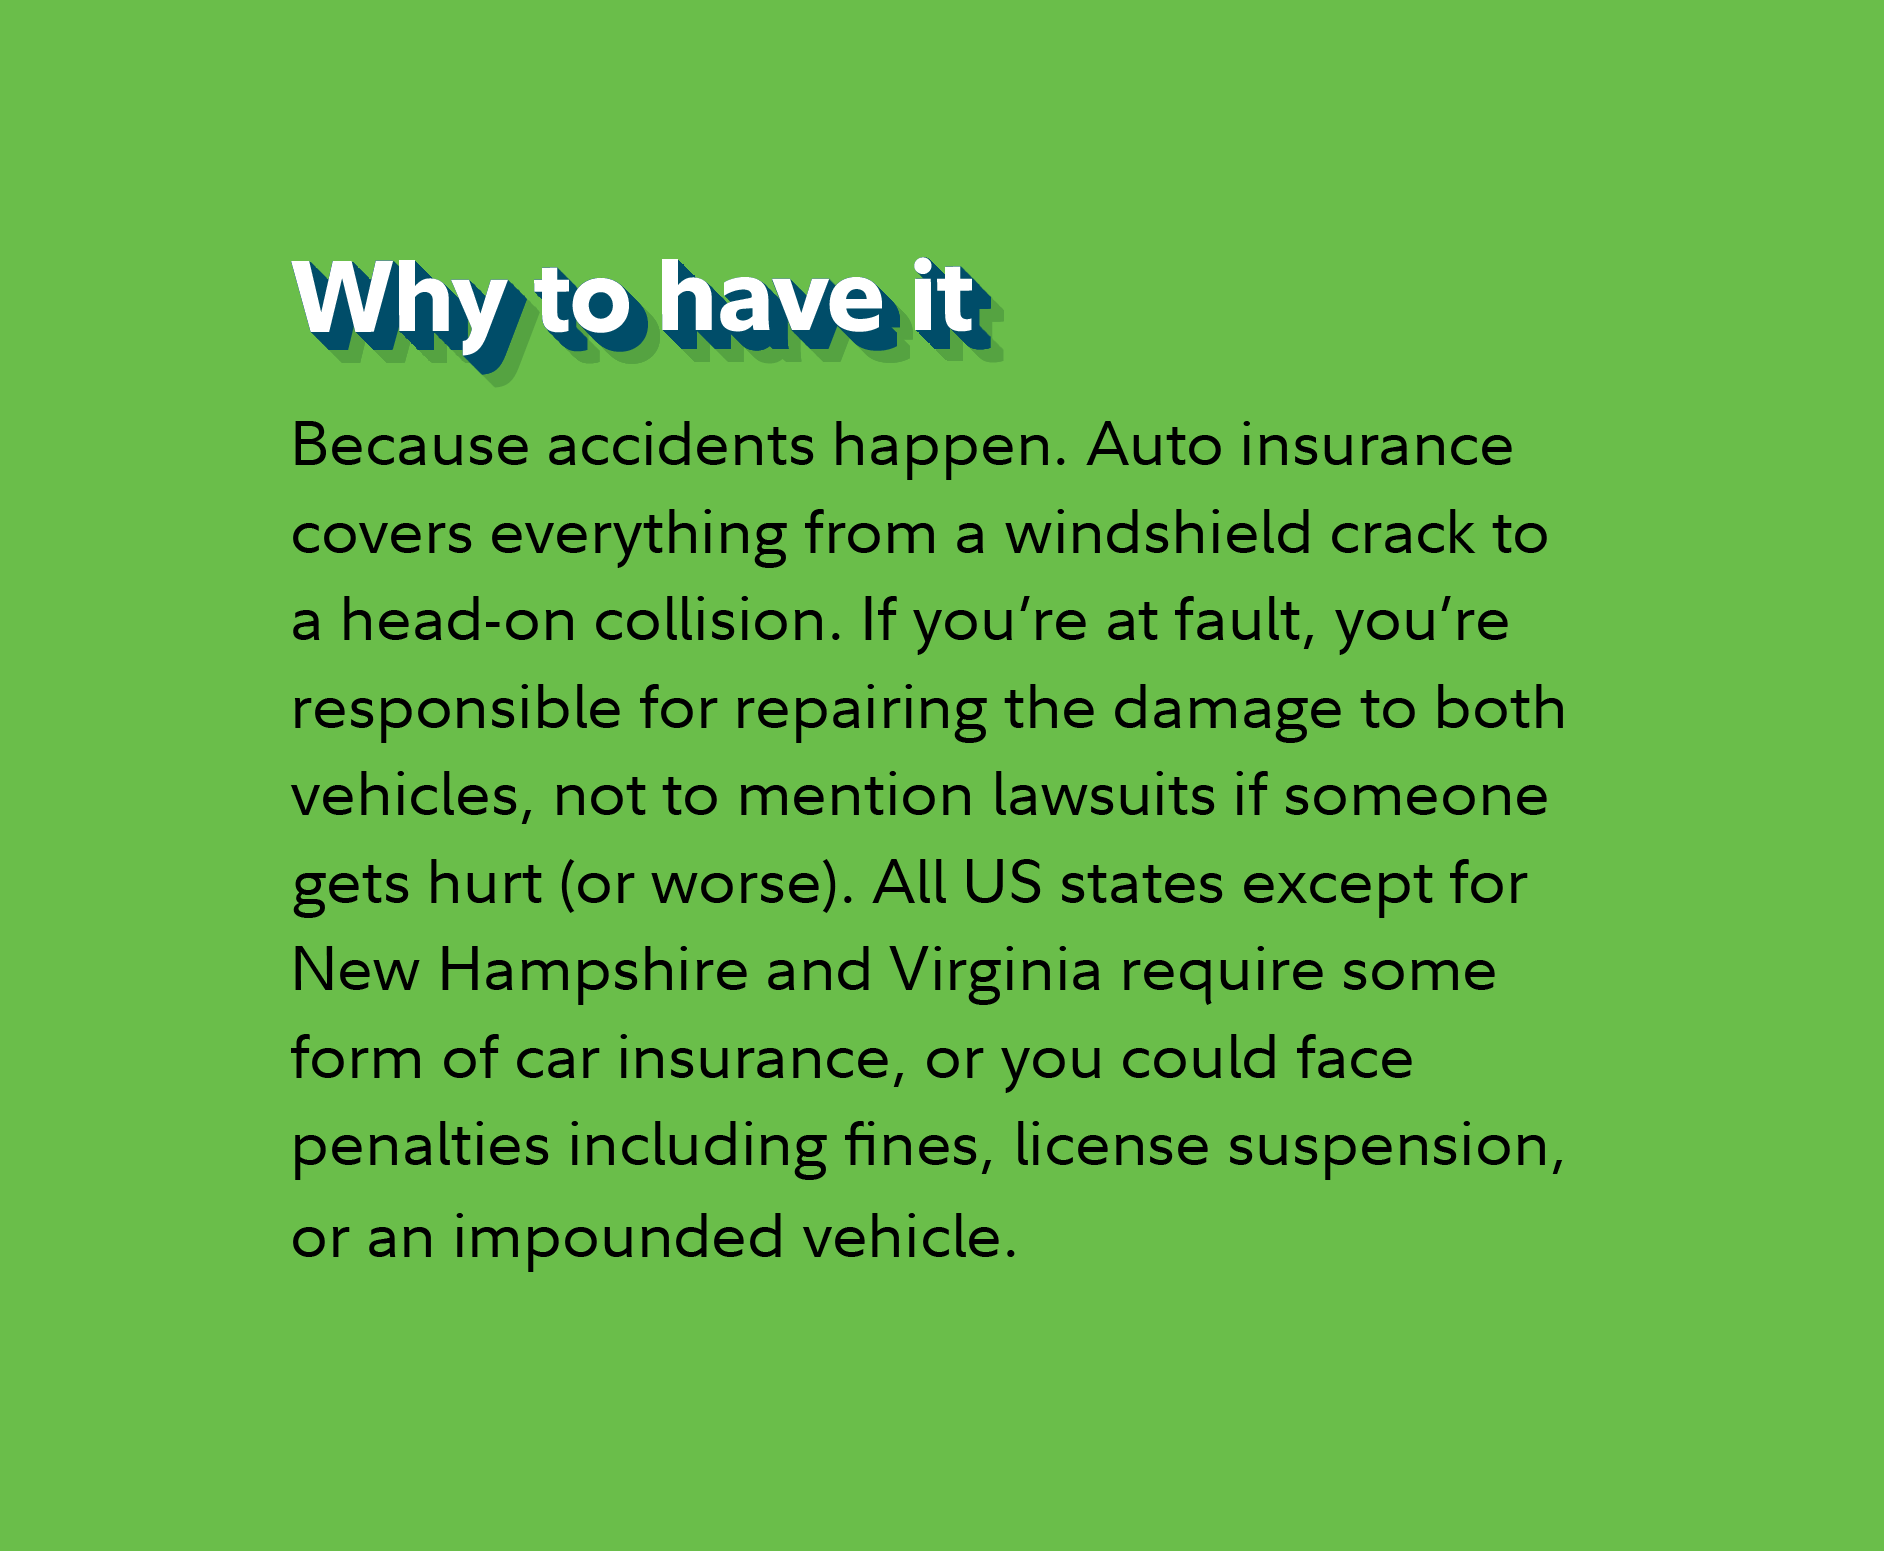 Why to have it  Because accidents happen. Auto insurance covers everything from a windshield crack to a head-on collision. If you’re at fault, you’re responsible for repairing the damage to both vehicles, not to mention lawsuits if someone gets hurt (or worse). All US states except for New Hampshire and Virginia require some form of car insurance, or you could face penalties including fines, license suspension, or an impounded vehicle.